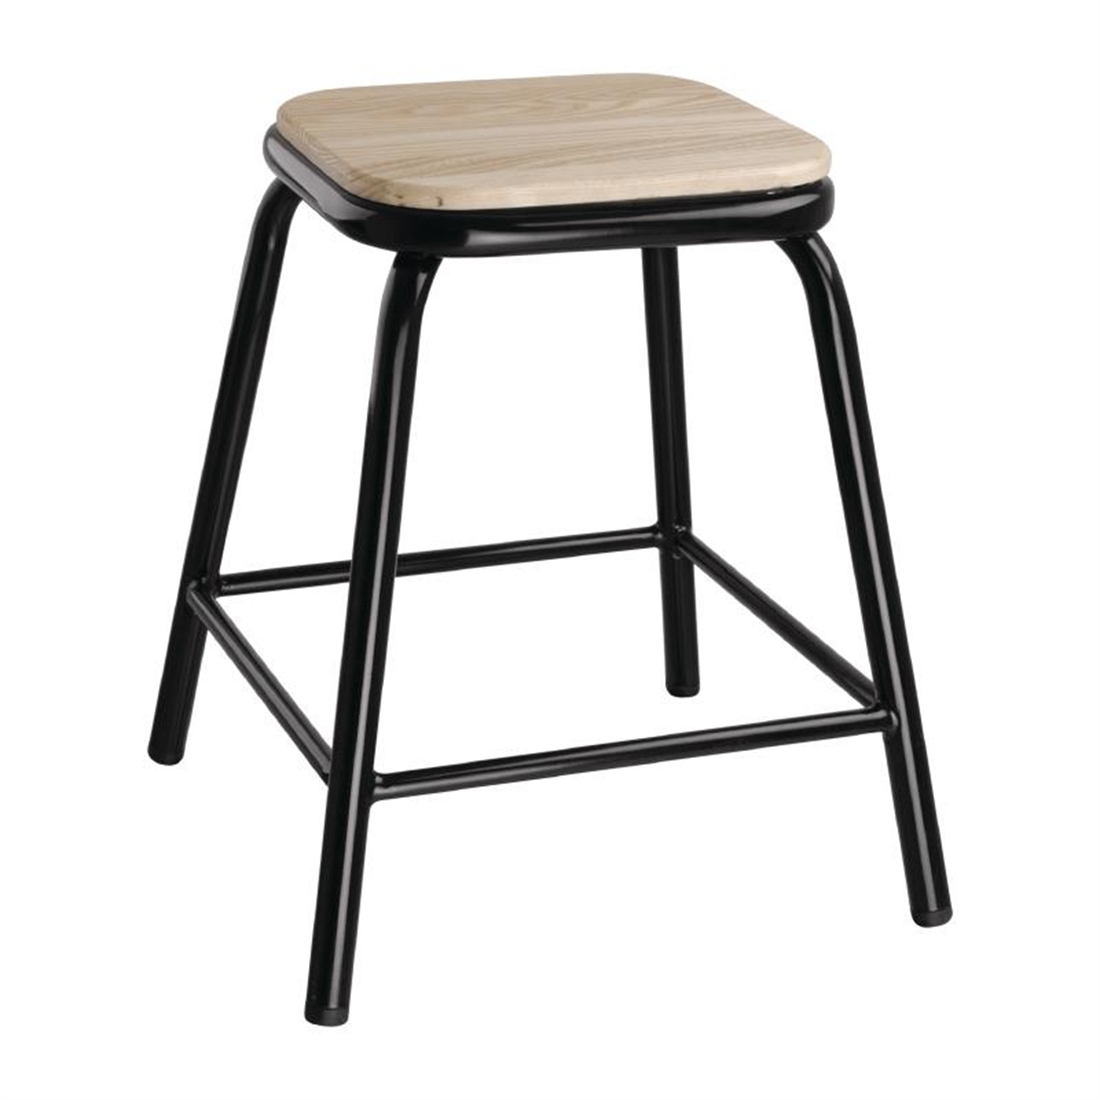 Bolero Black Low Barstool with Wooden Seatpad (Pack of 4)